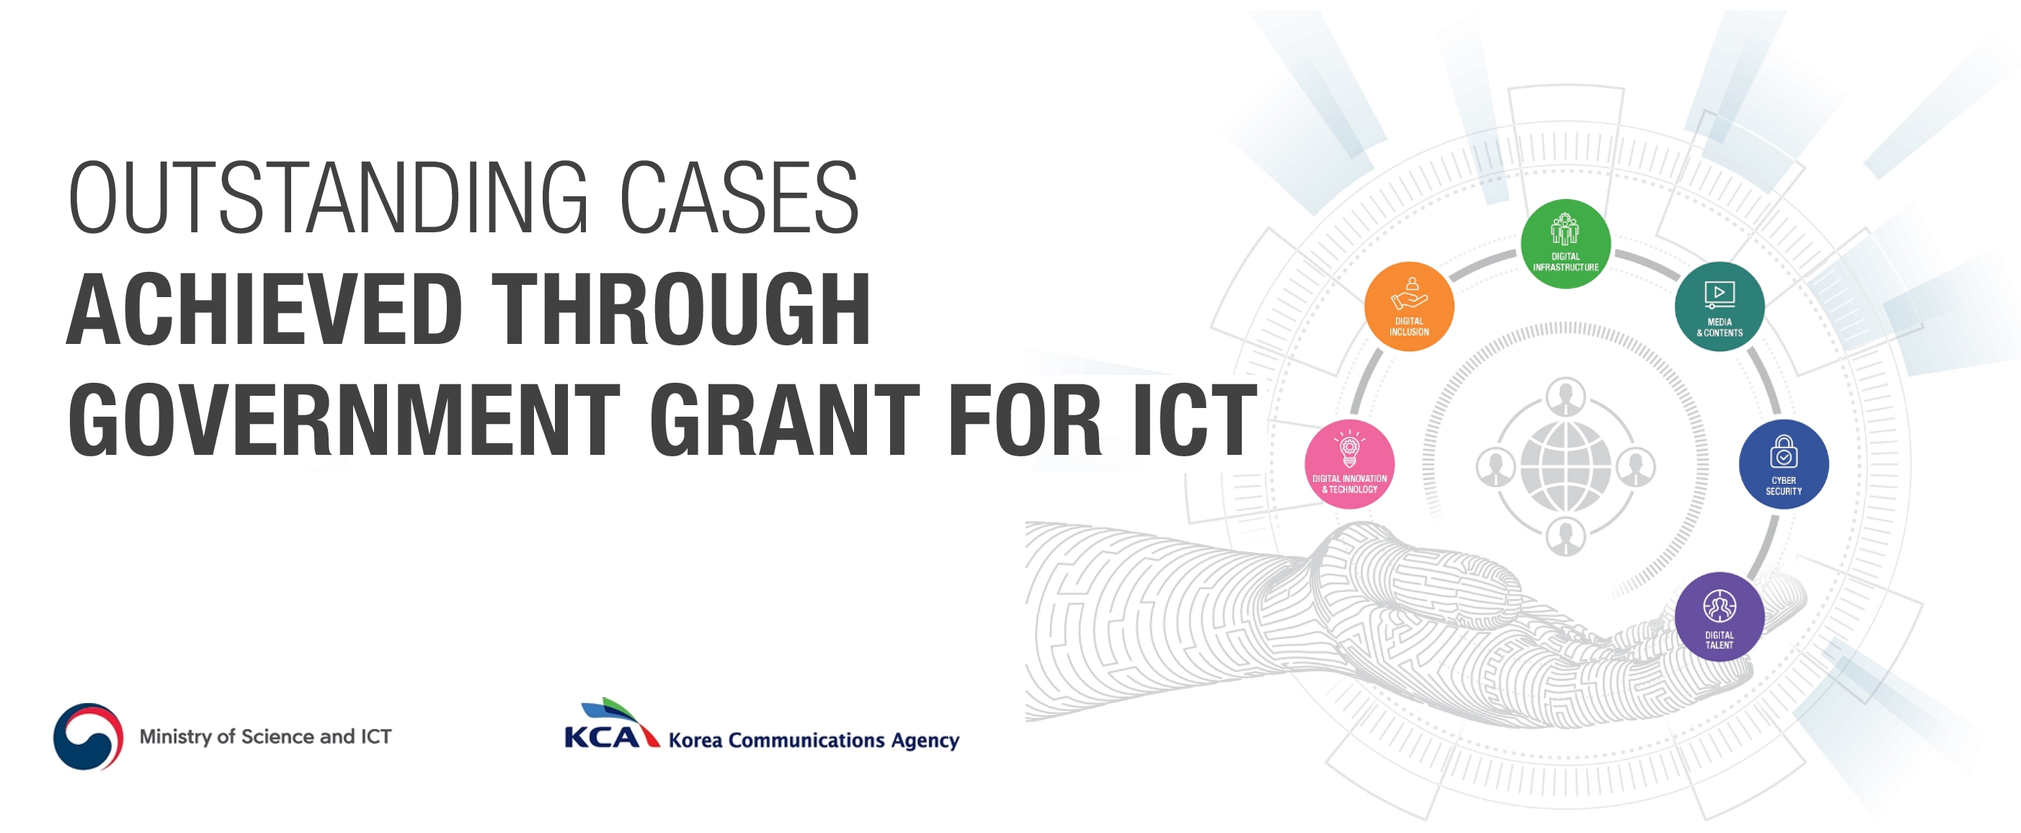 OUTSTADING CASESE ACHIEVED THROUGH GOVERNMENT GRANT FOR ICT Ministry of Science and ICT Korea Communications Agency